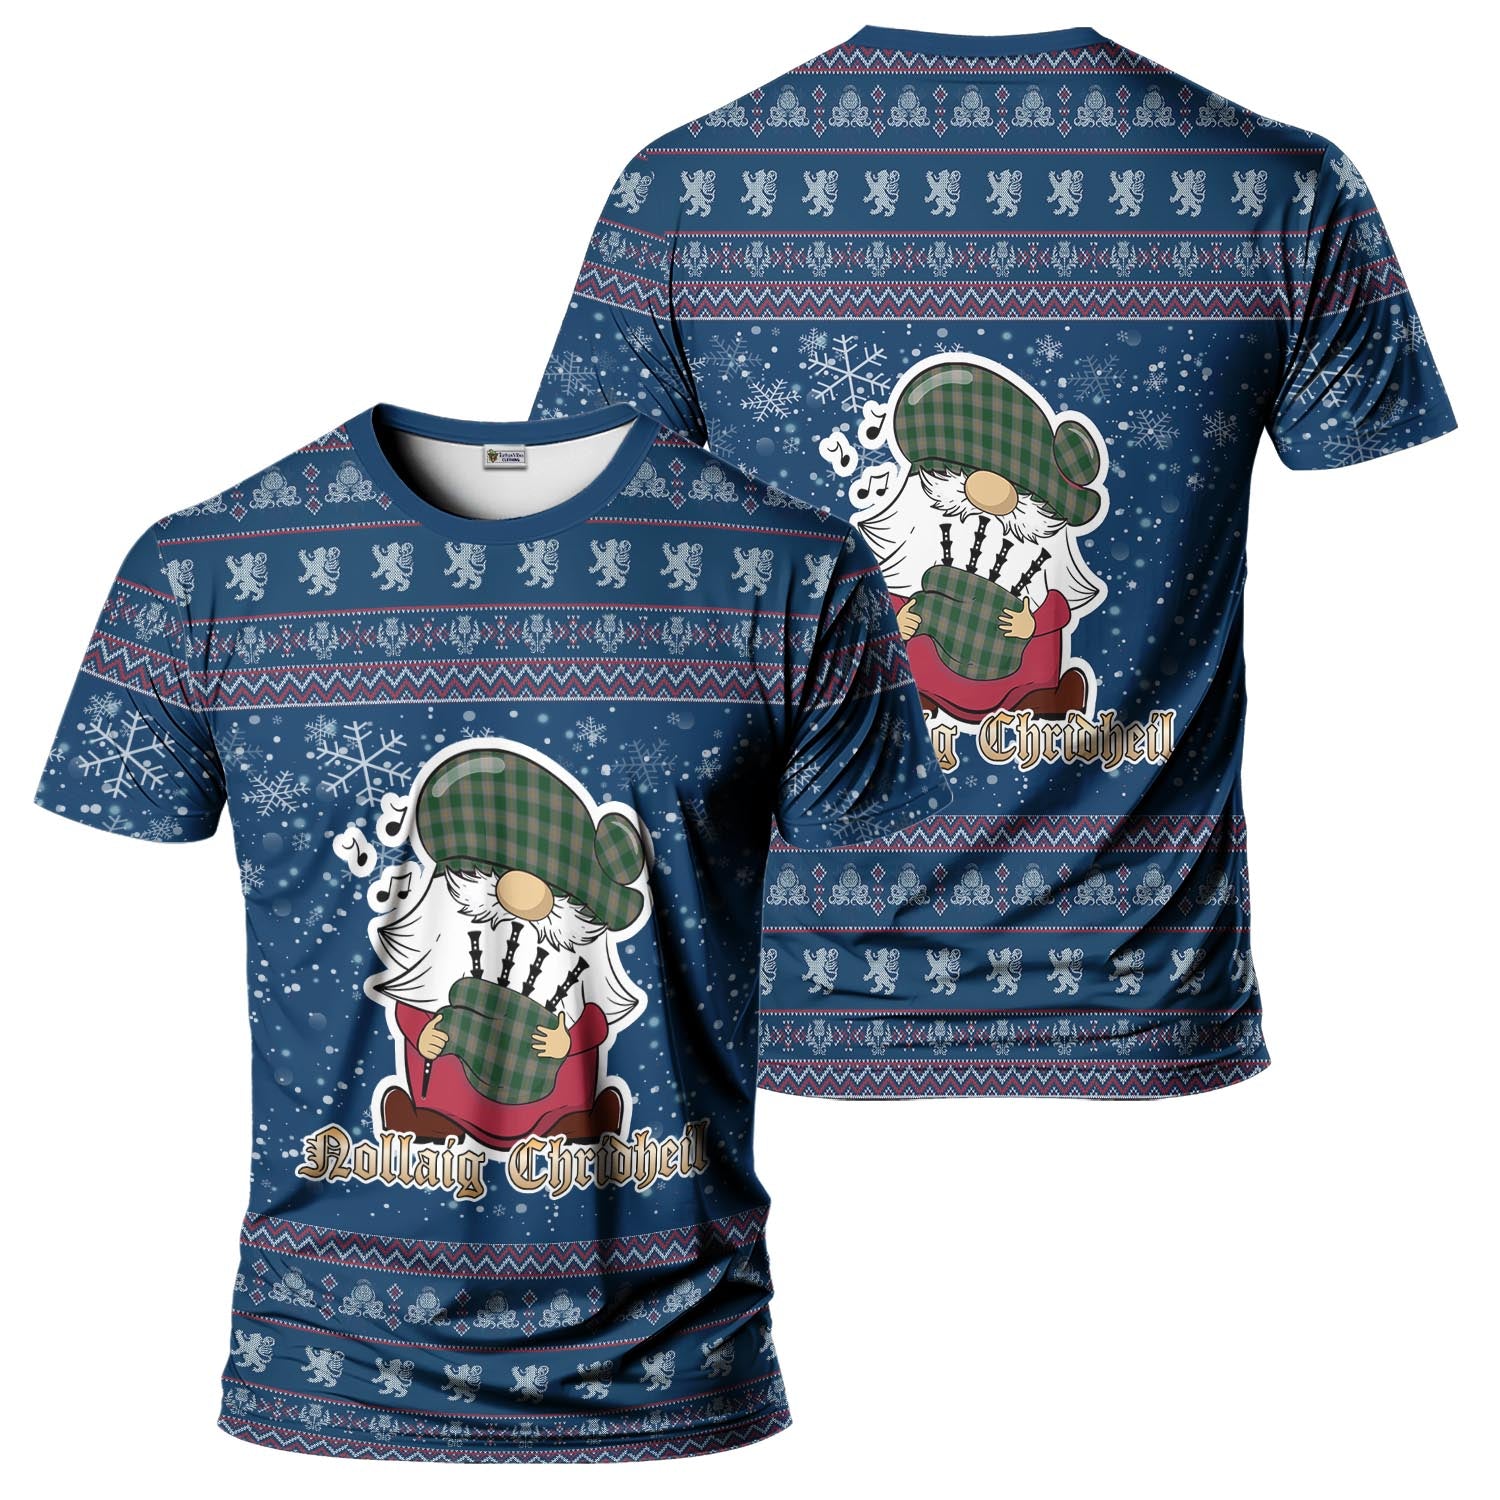 Ledford Clan Christmas Family T-Shirt with Funny Gnome Playing Bagpipes Kid's Shirt Blue - Tartanvibesclothing